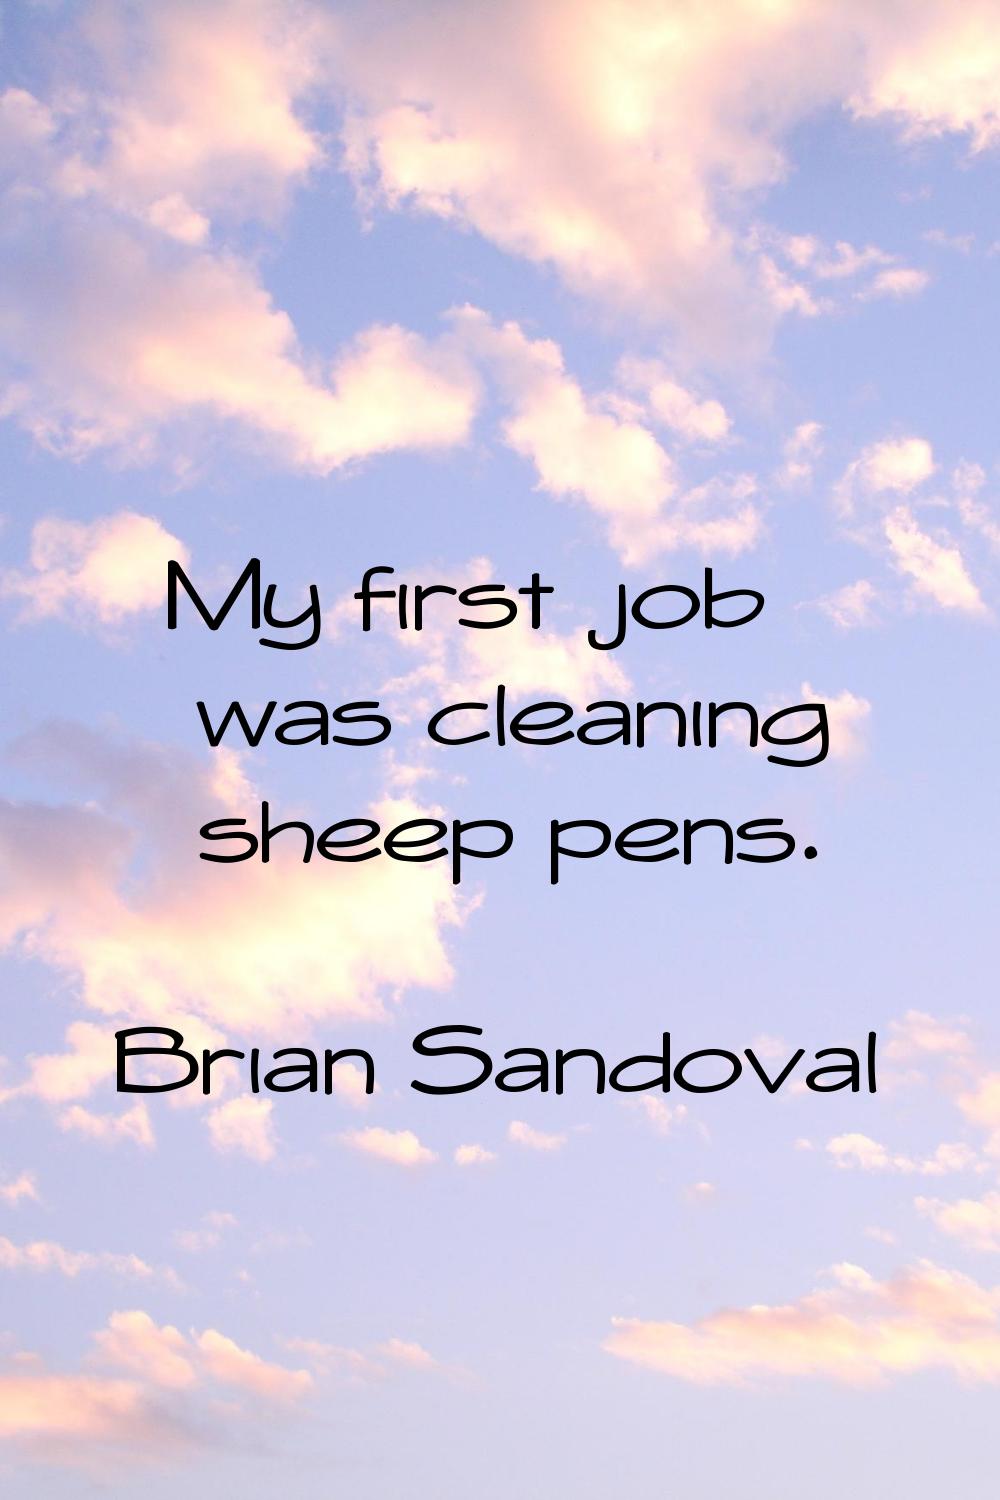 My first job was cleaning sheep pens.